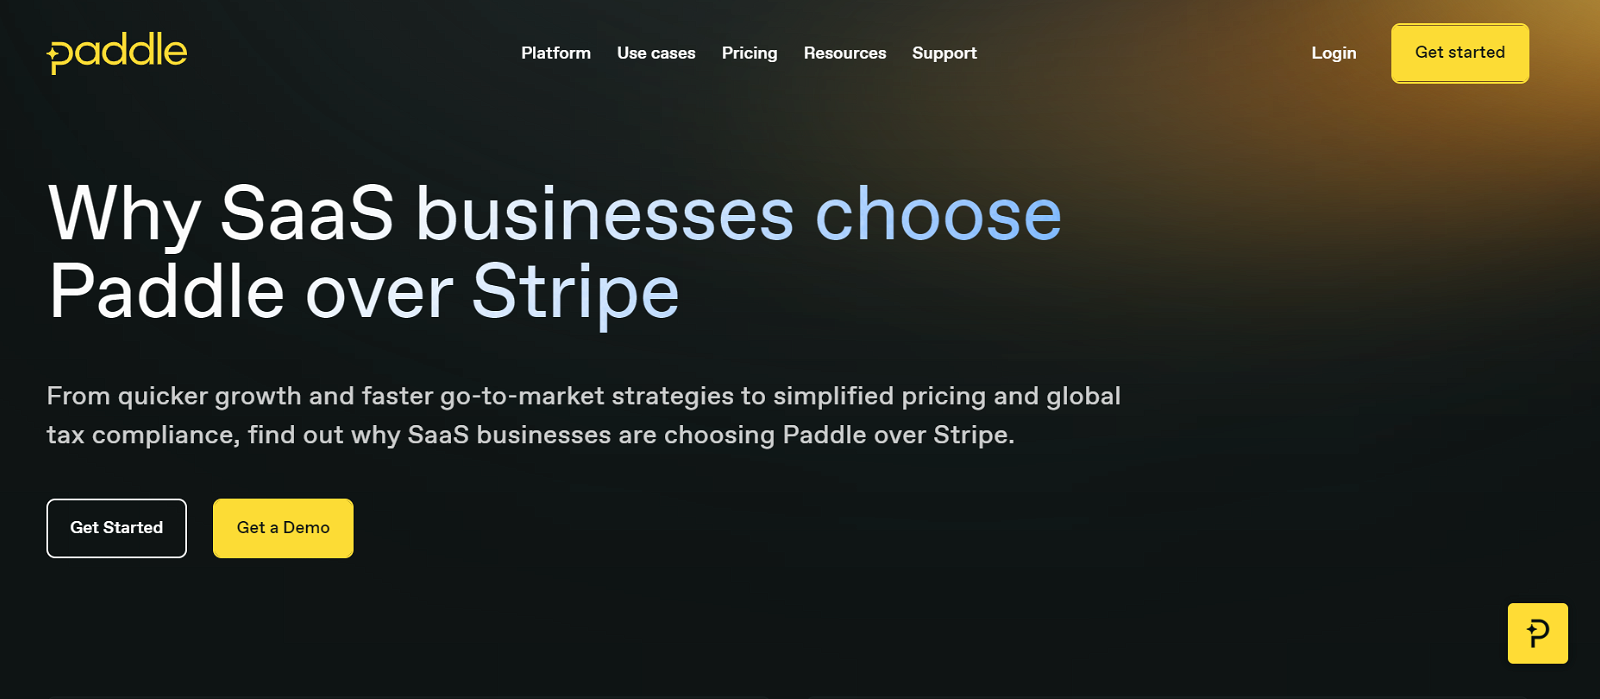 Example of Paddleâ€™s comparison page to Stripe.